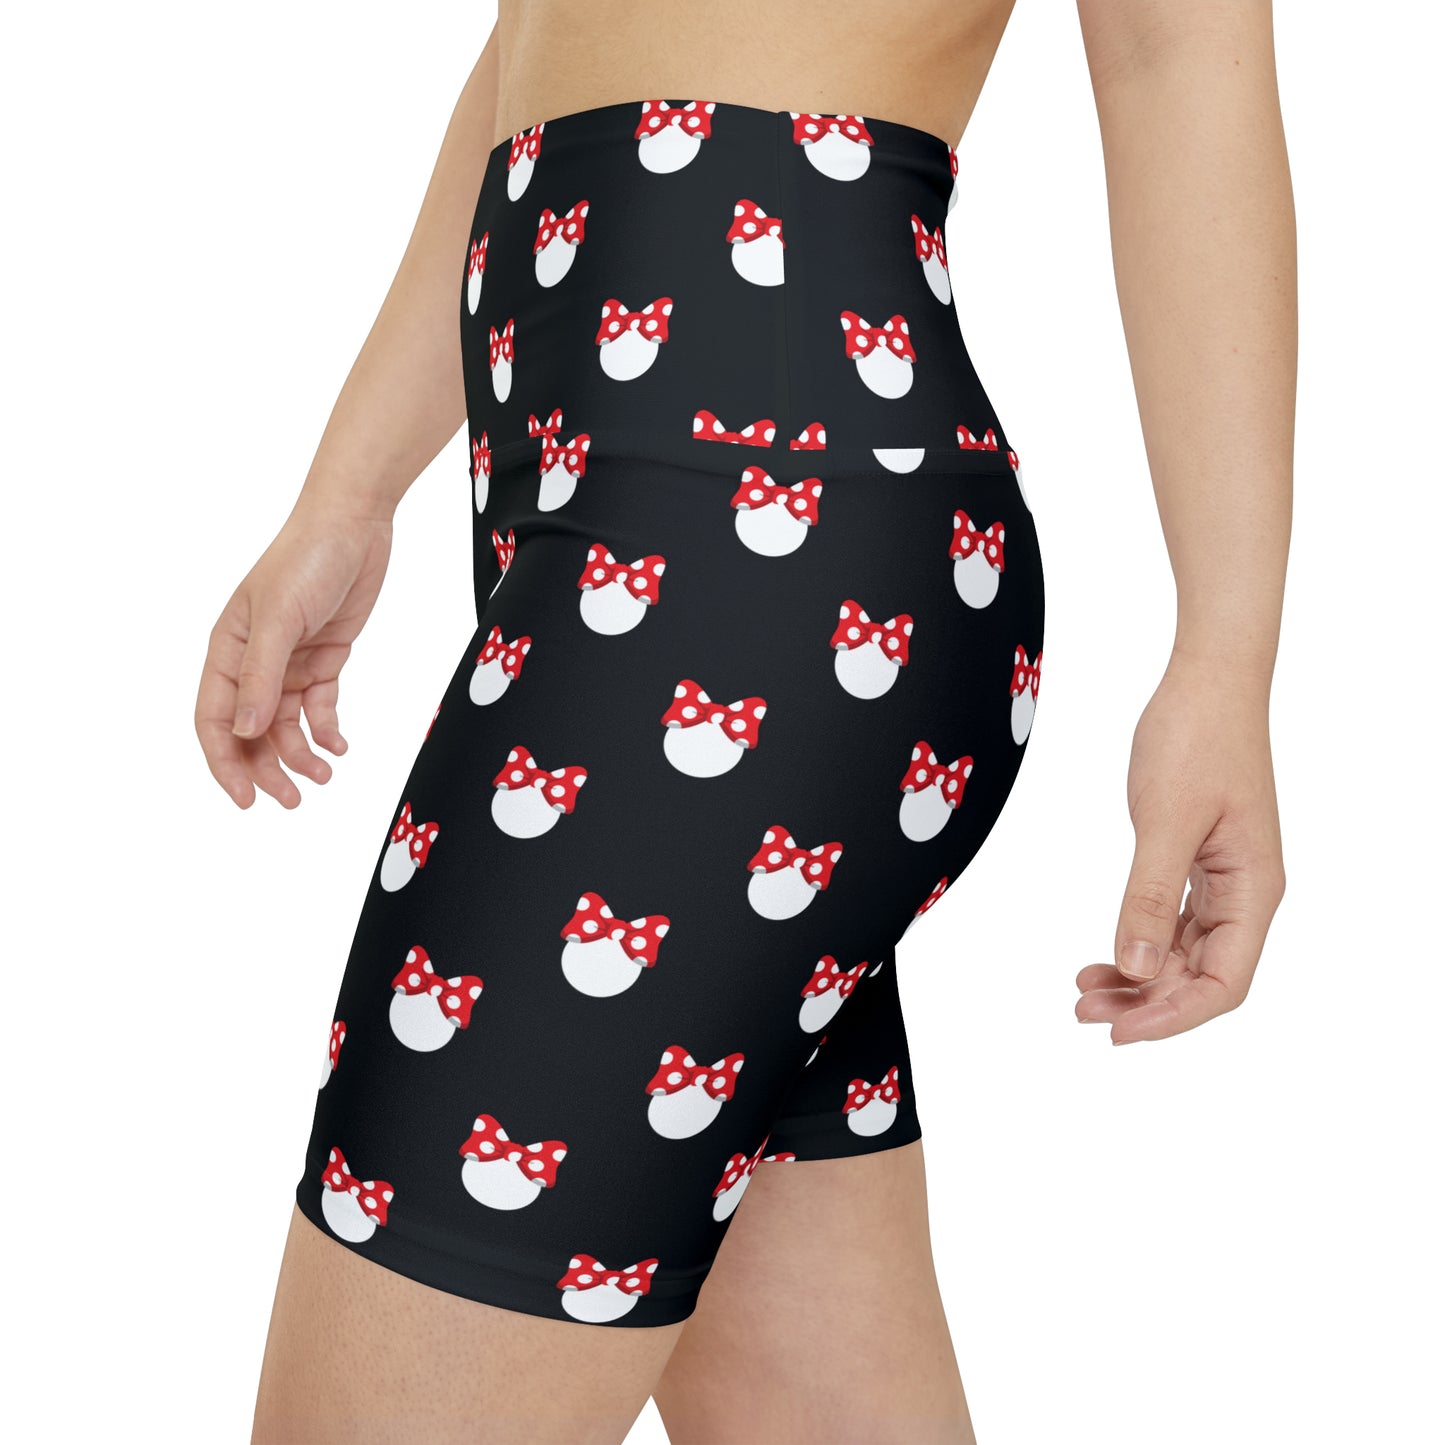 White Polka Dot Red Bow Women's Athletic Workout Shorts